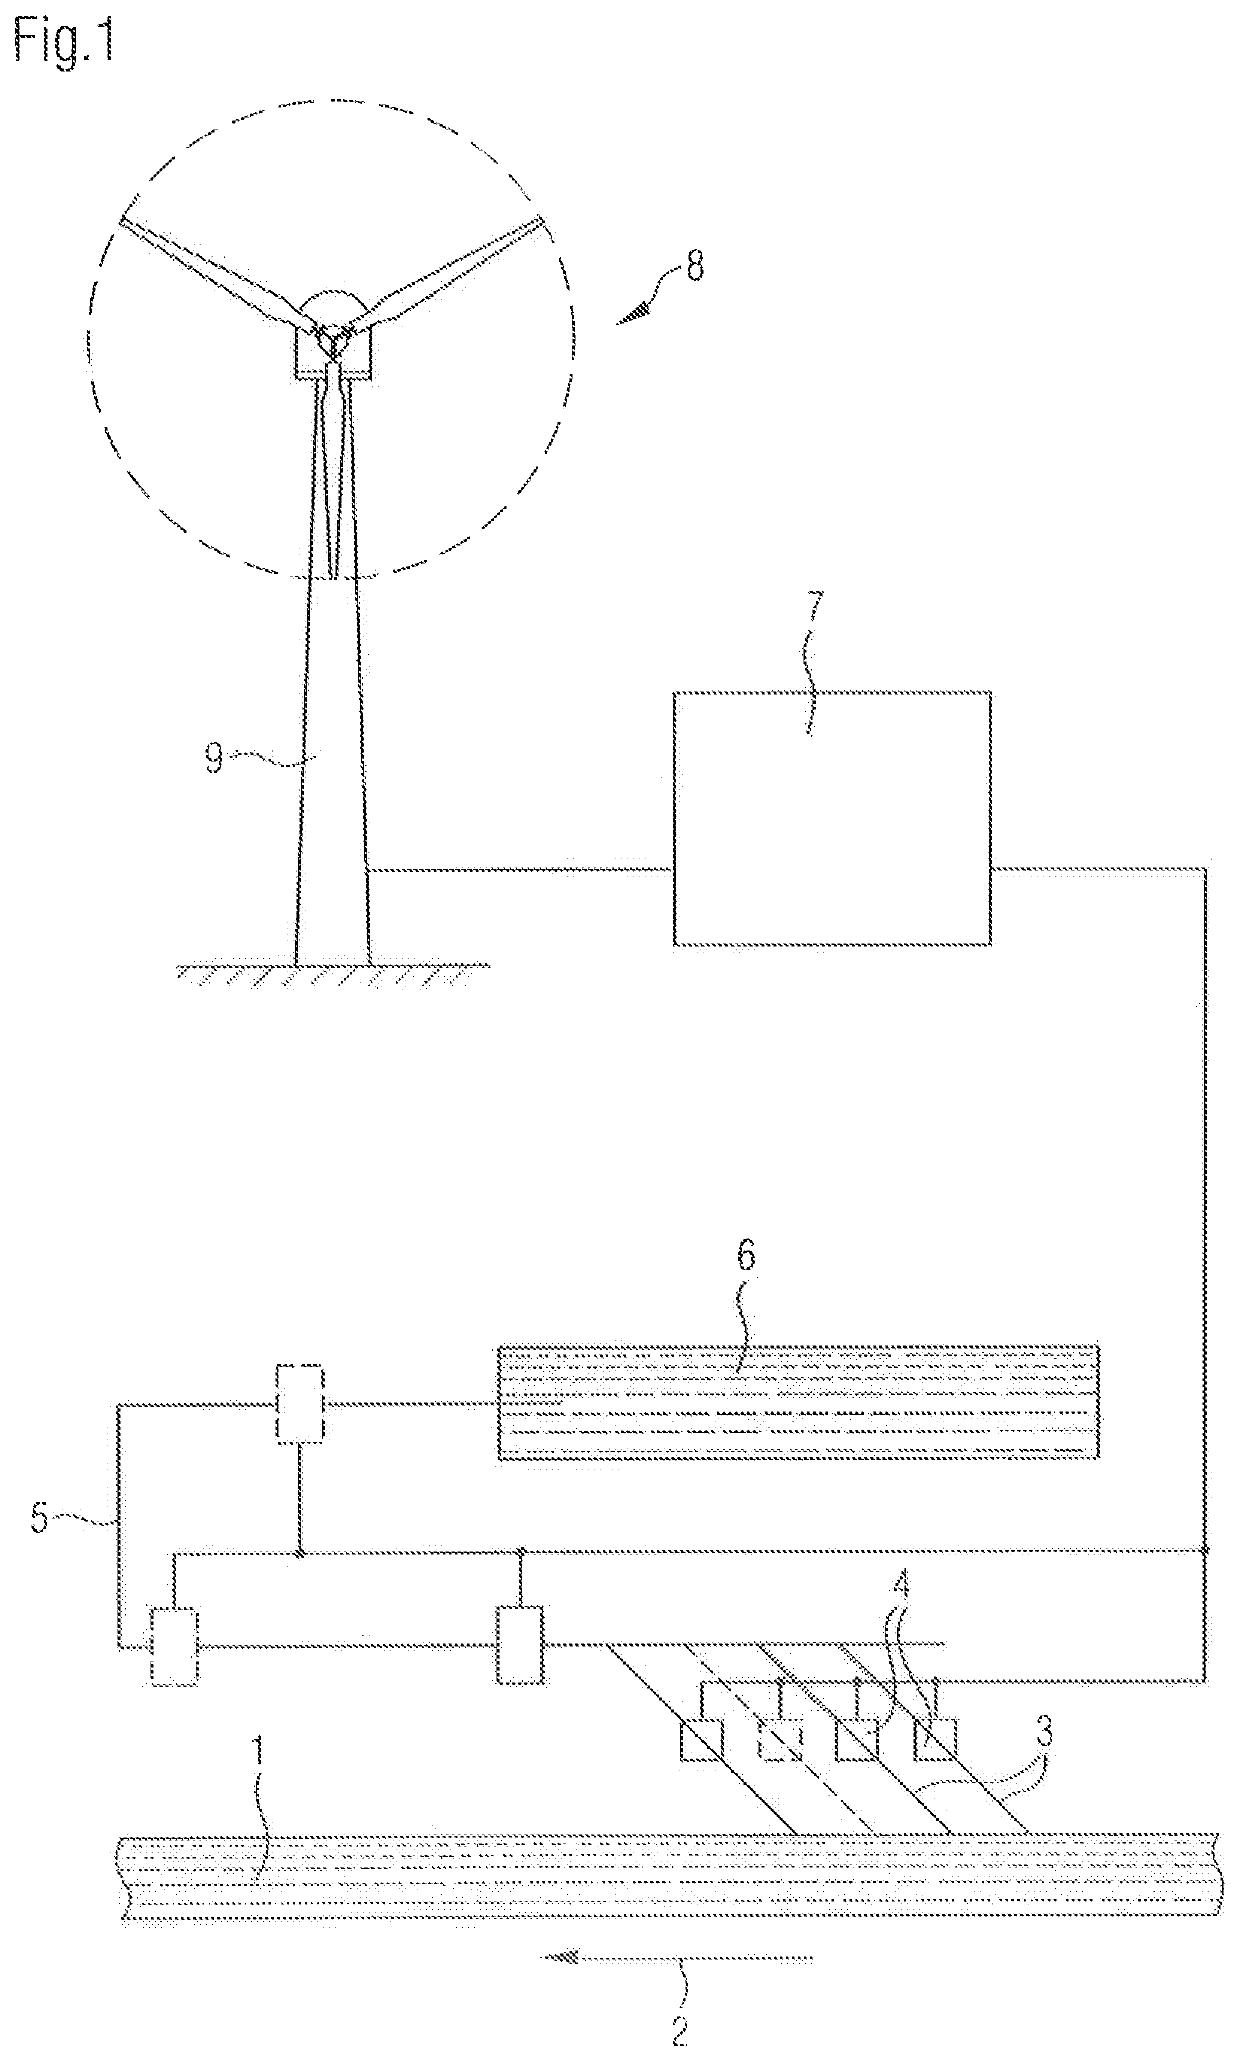 Device and method for preventing floods